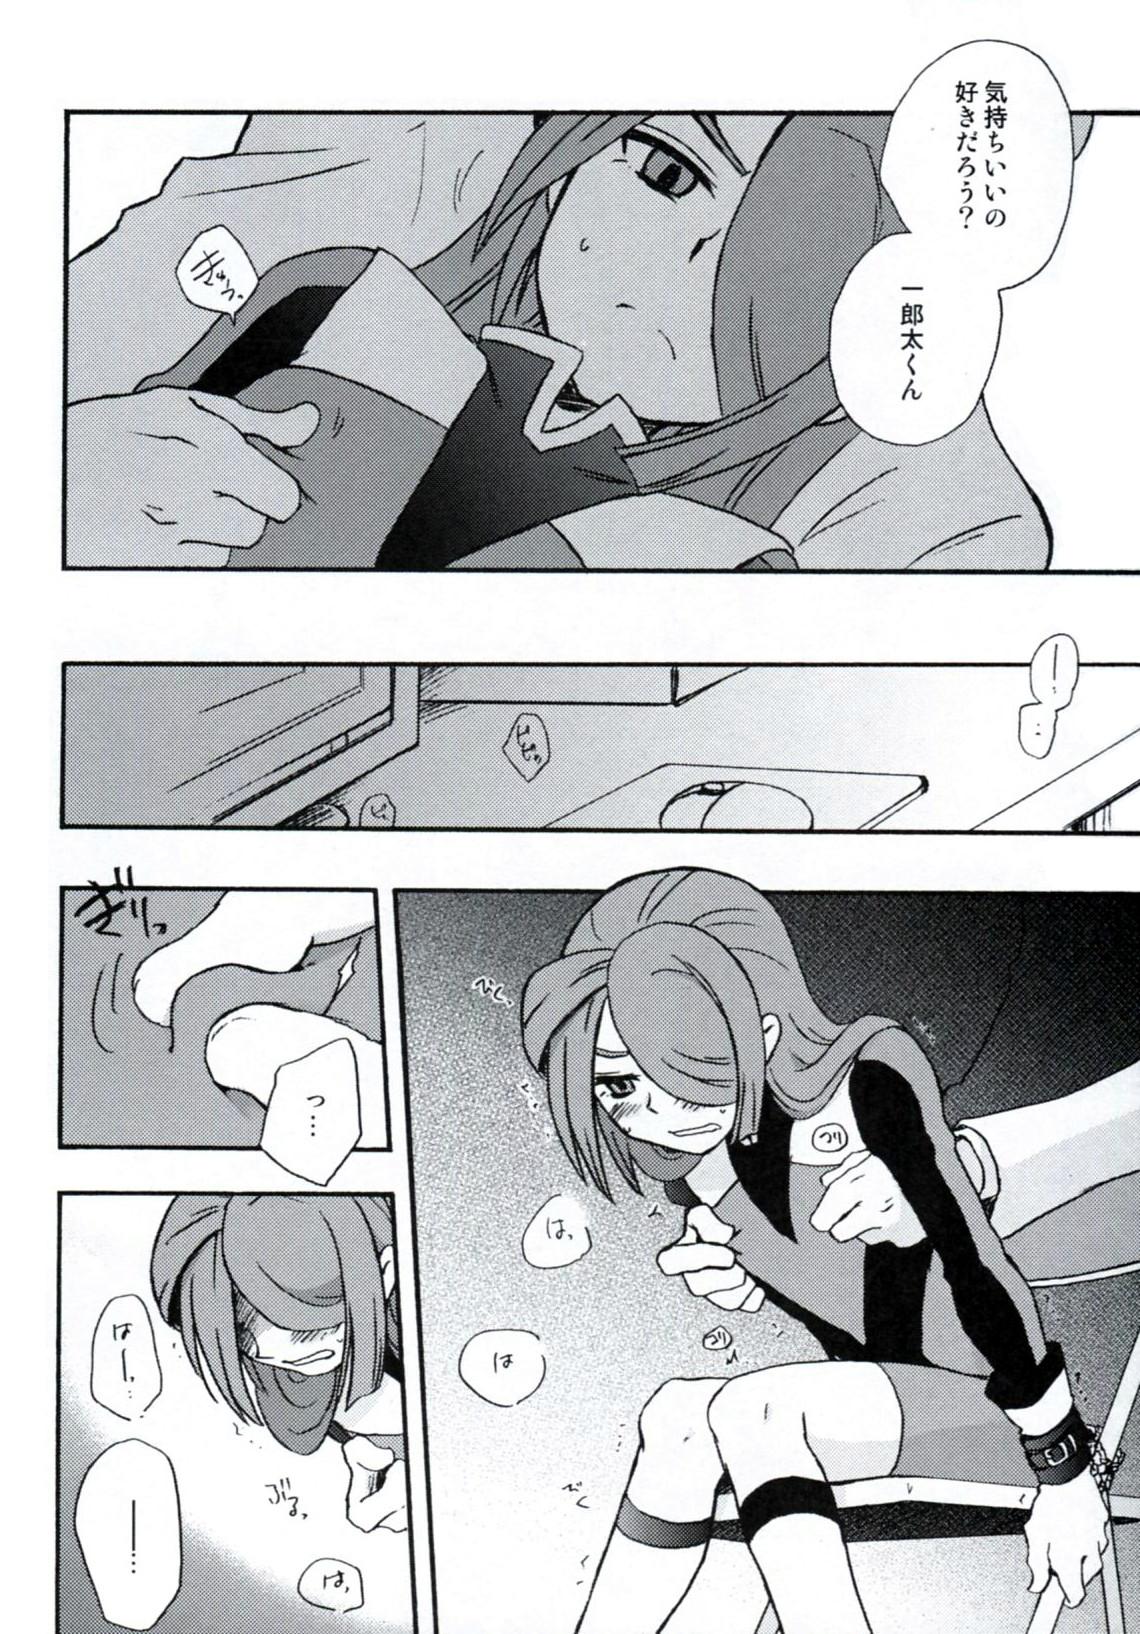 Scandal DE-10 Replay - Inazuma eleven Hair - Page 11